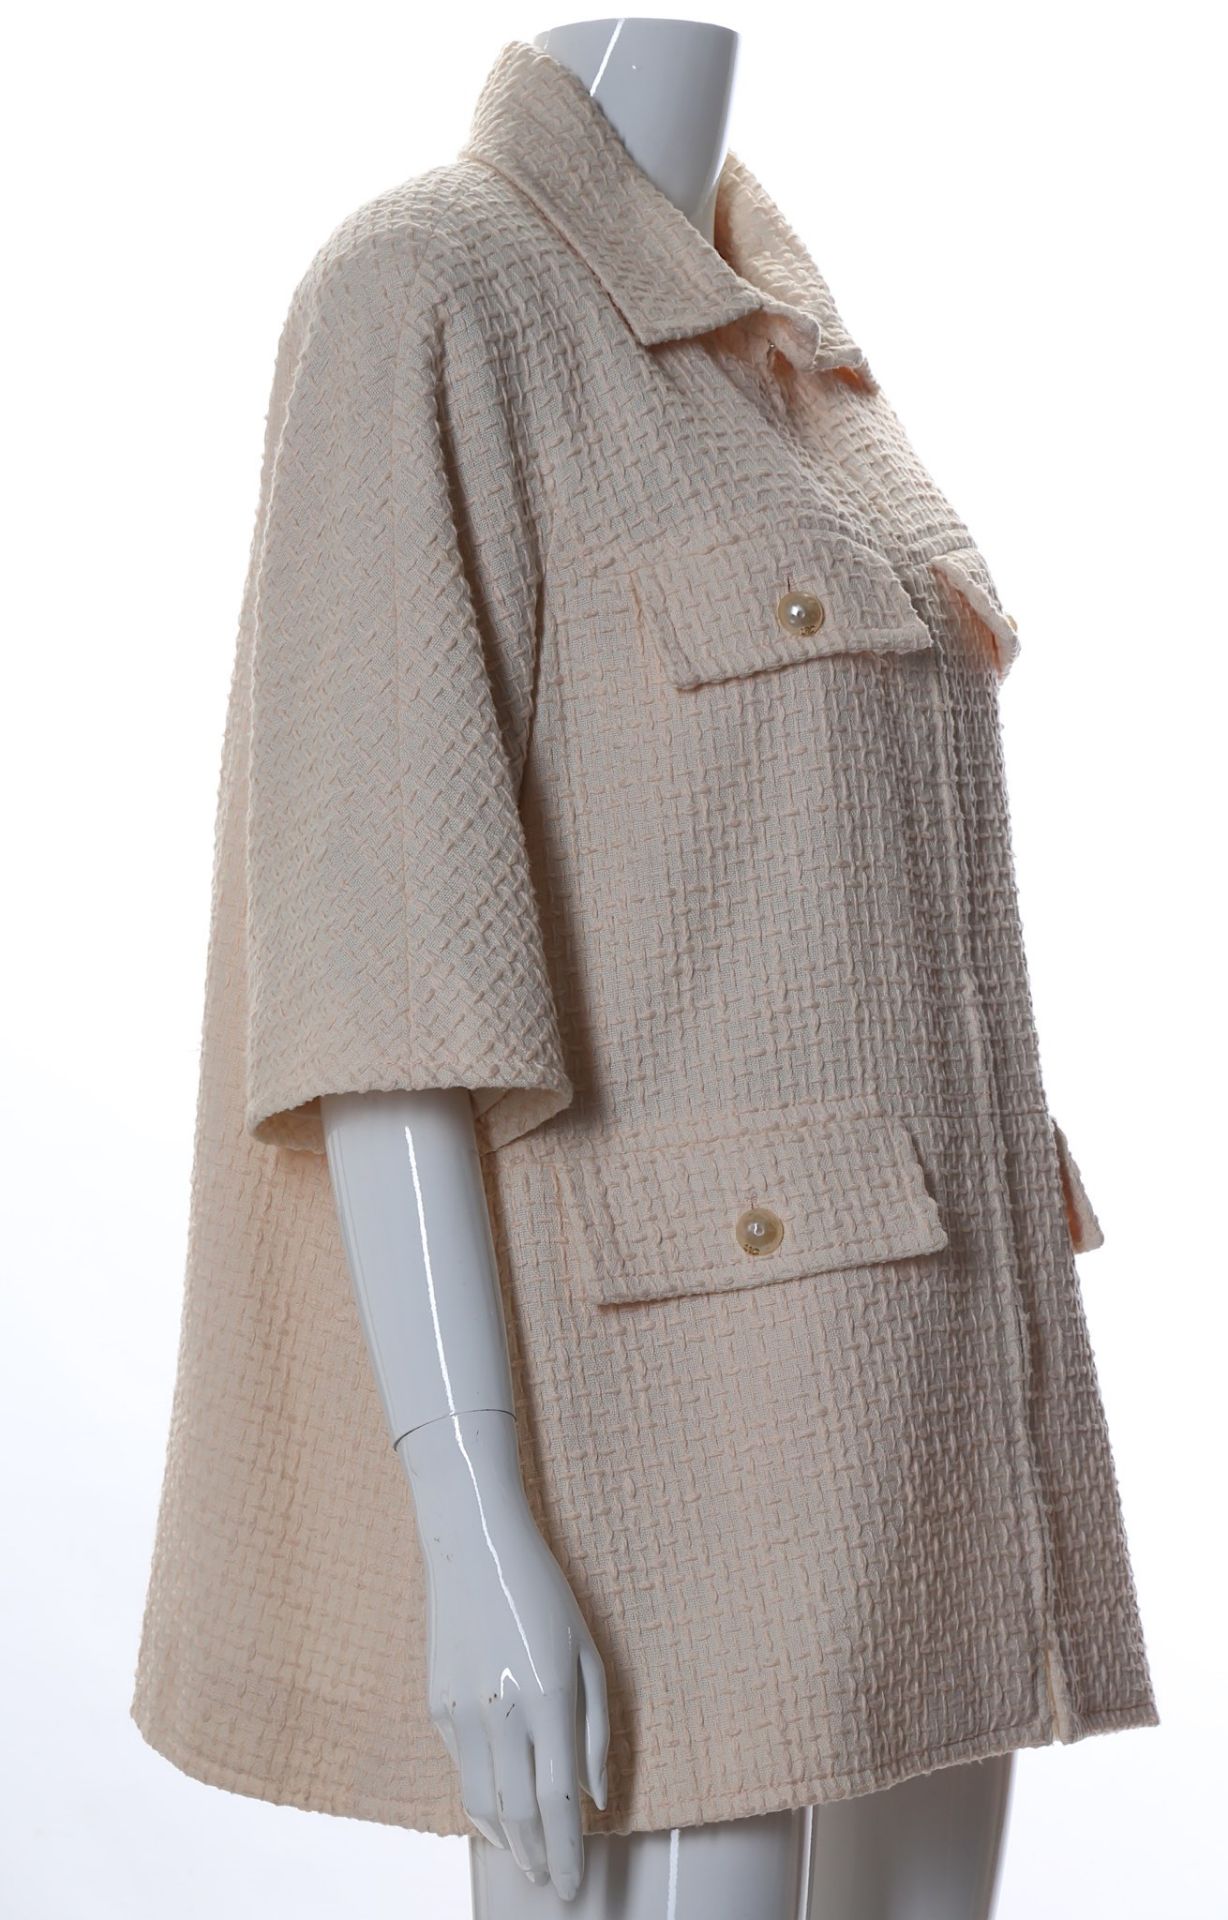 Chanel Pale Pink Cotton Jacket, 2010s, short sleev - Image 3 of 5